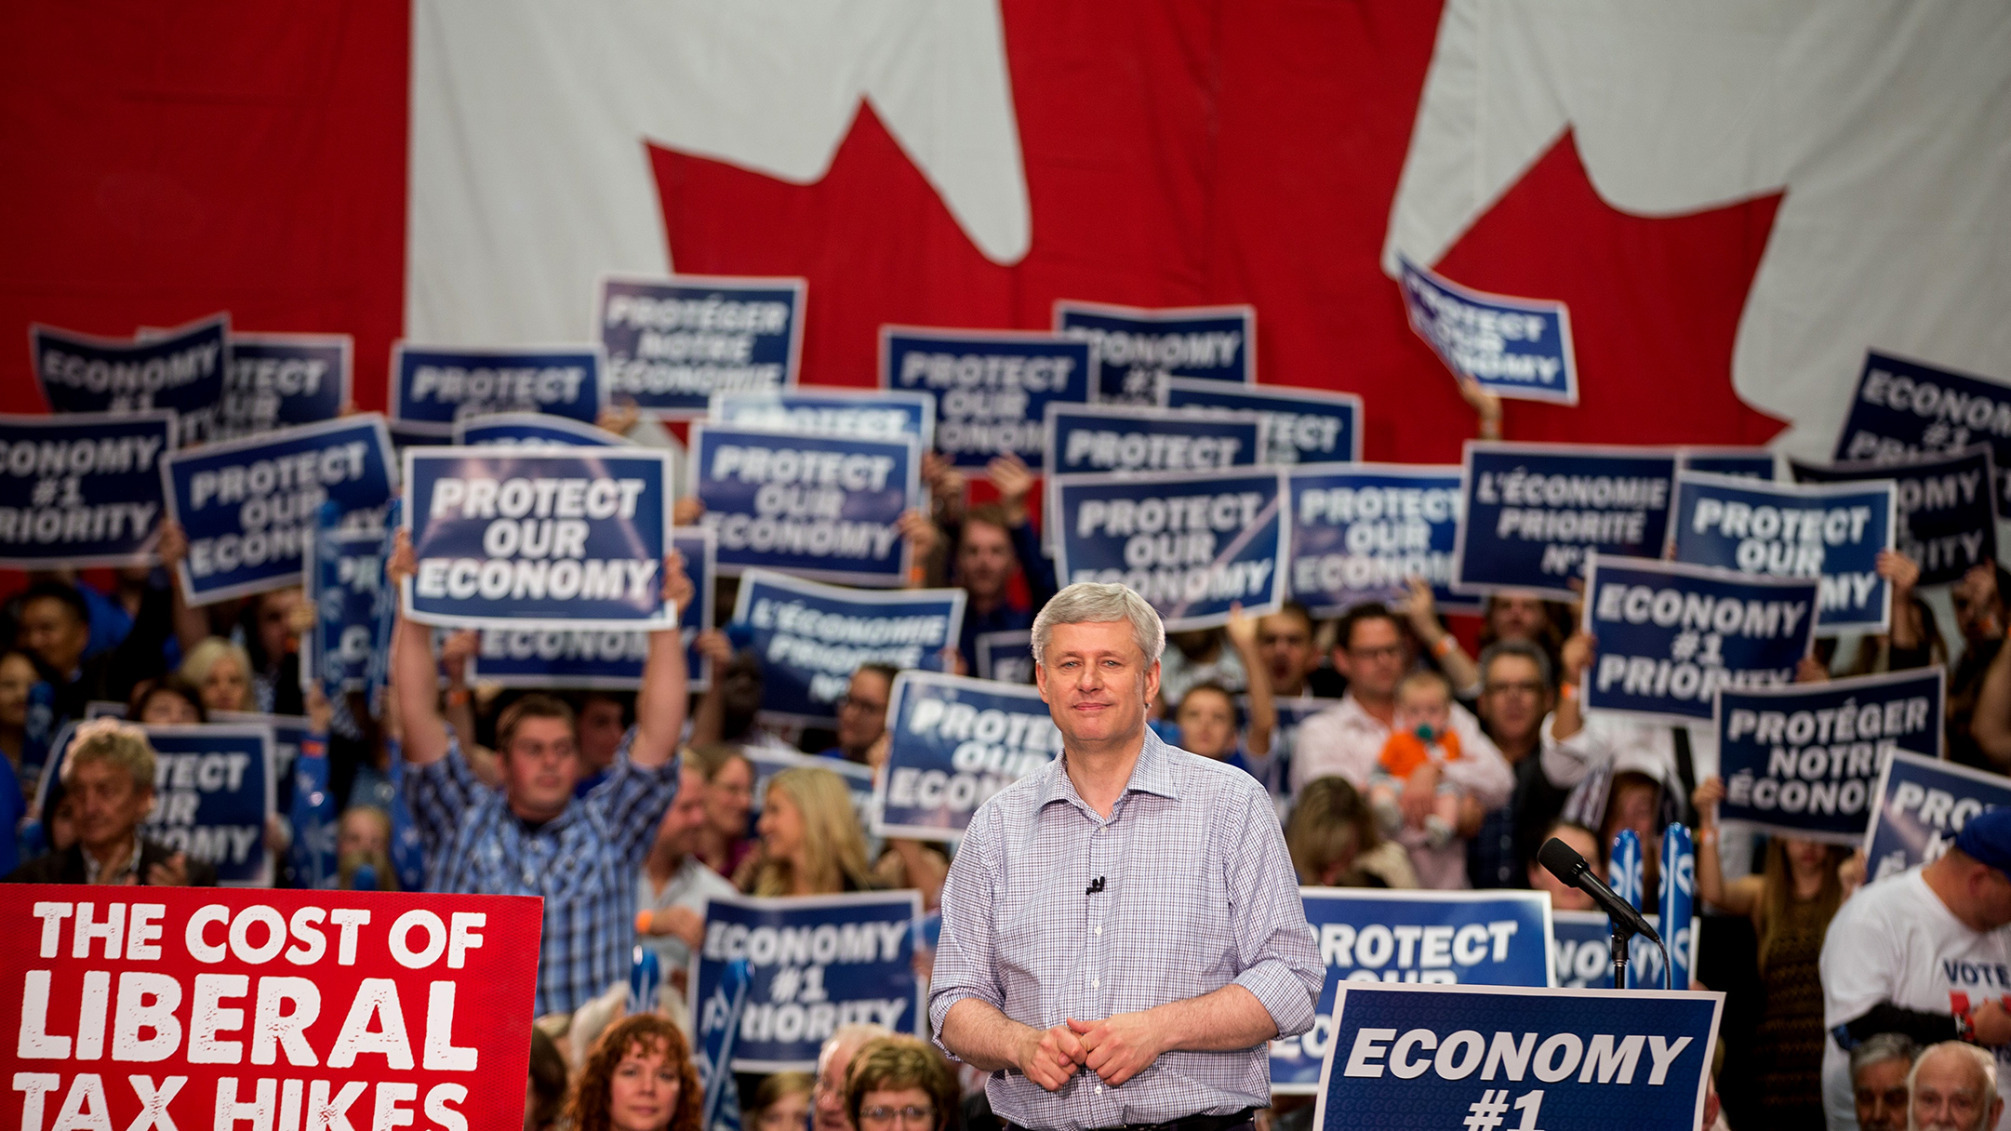 Conservative leader Stephen Harper looks on during a rally in London, Ontario.
